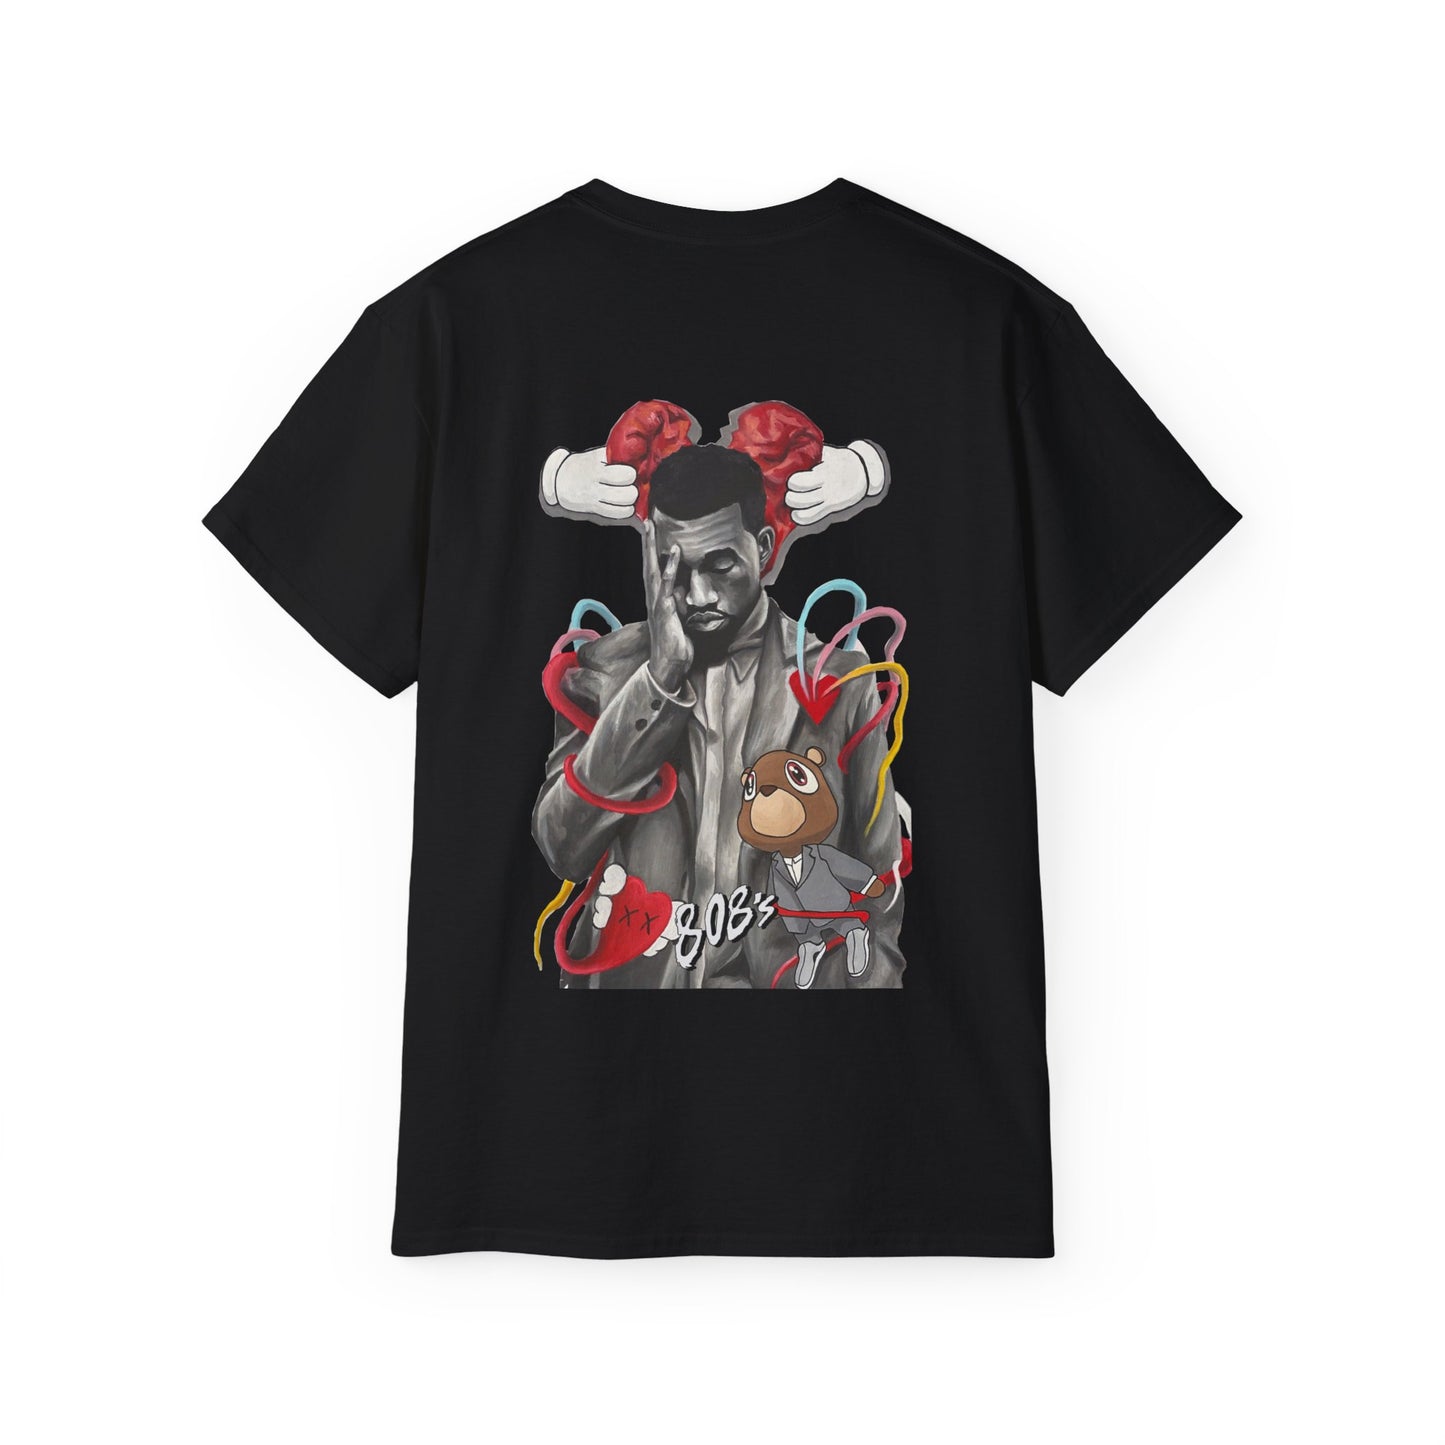 Kanye Heartless - T-shirt (Double-Sided)